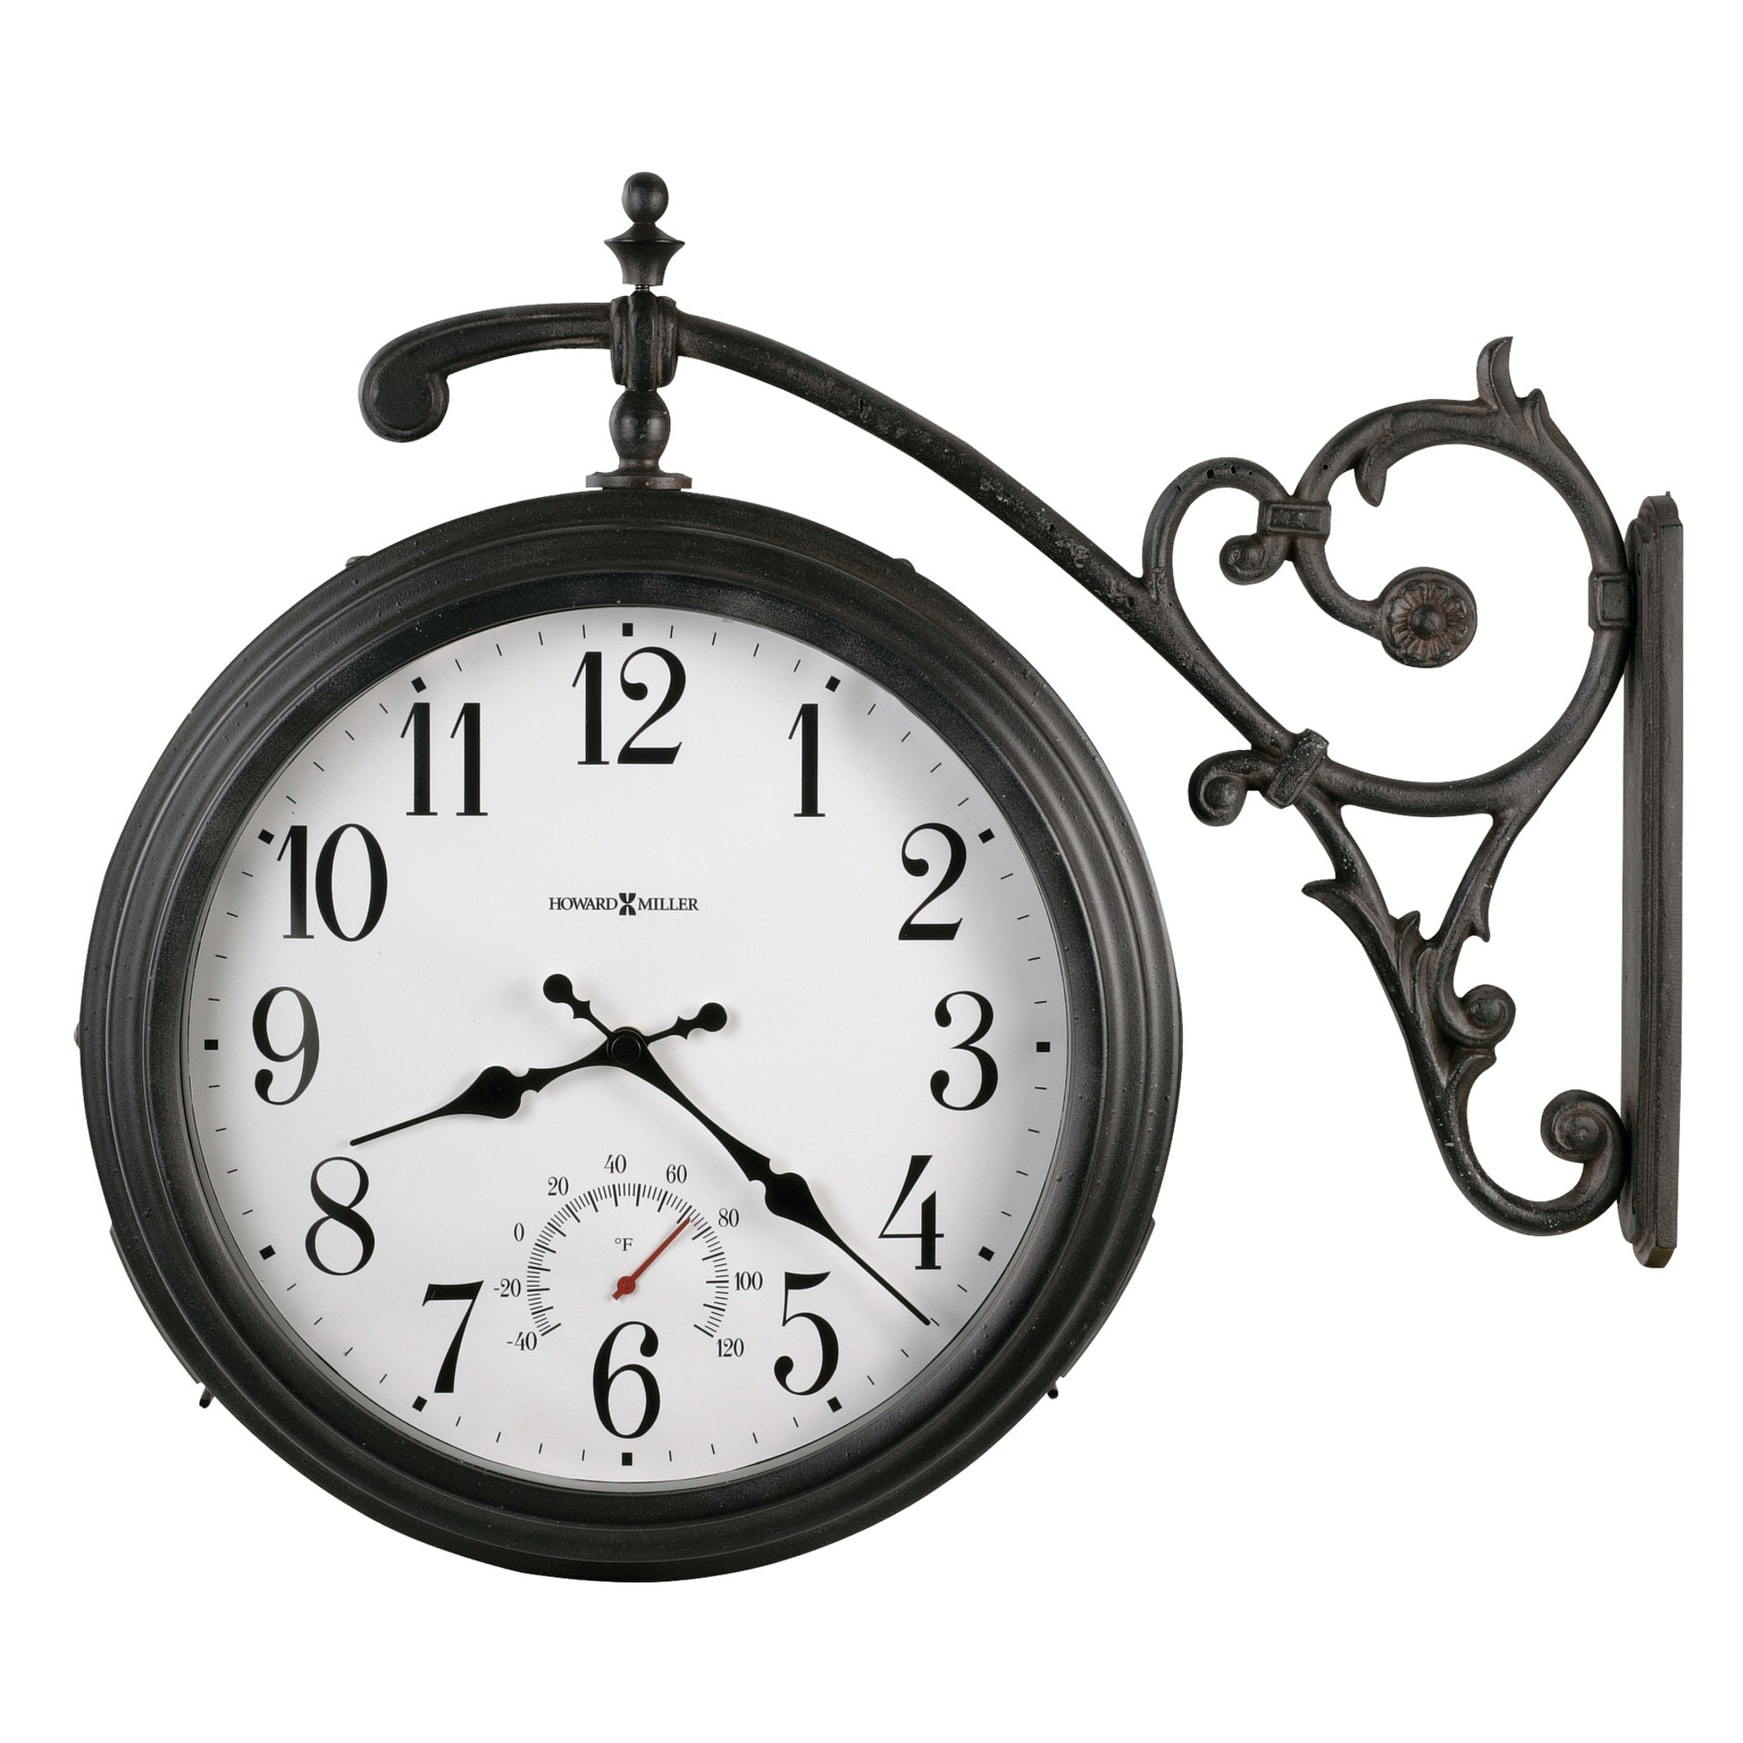 BARTRAM RUSTIC AGED MATTE BLACK FACE WALL CLOCK NAUTICAL ROPE ACCENT UTTERMOST 